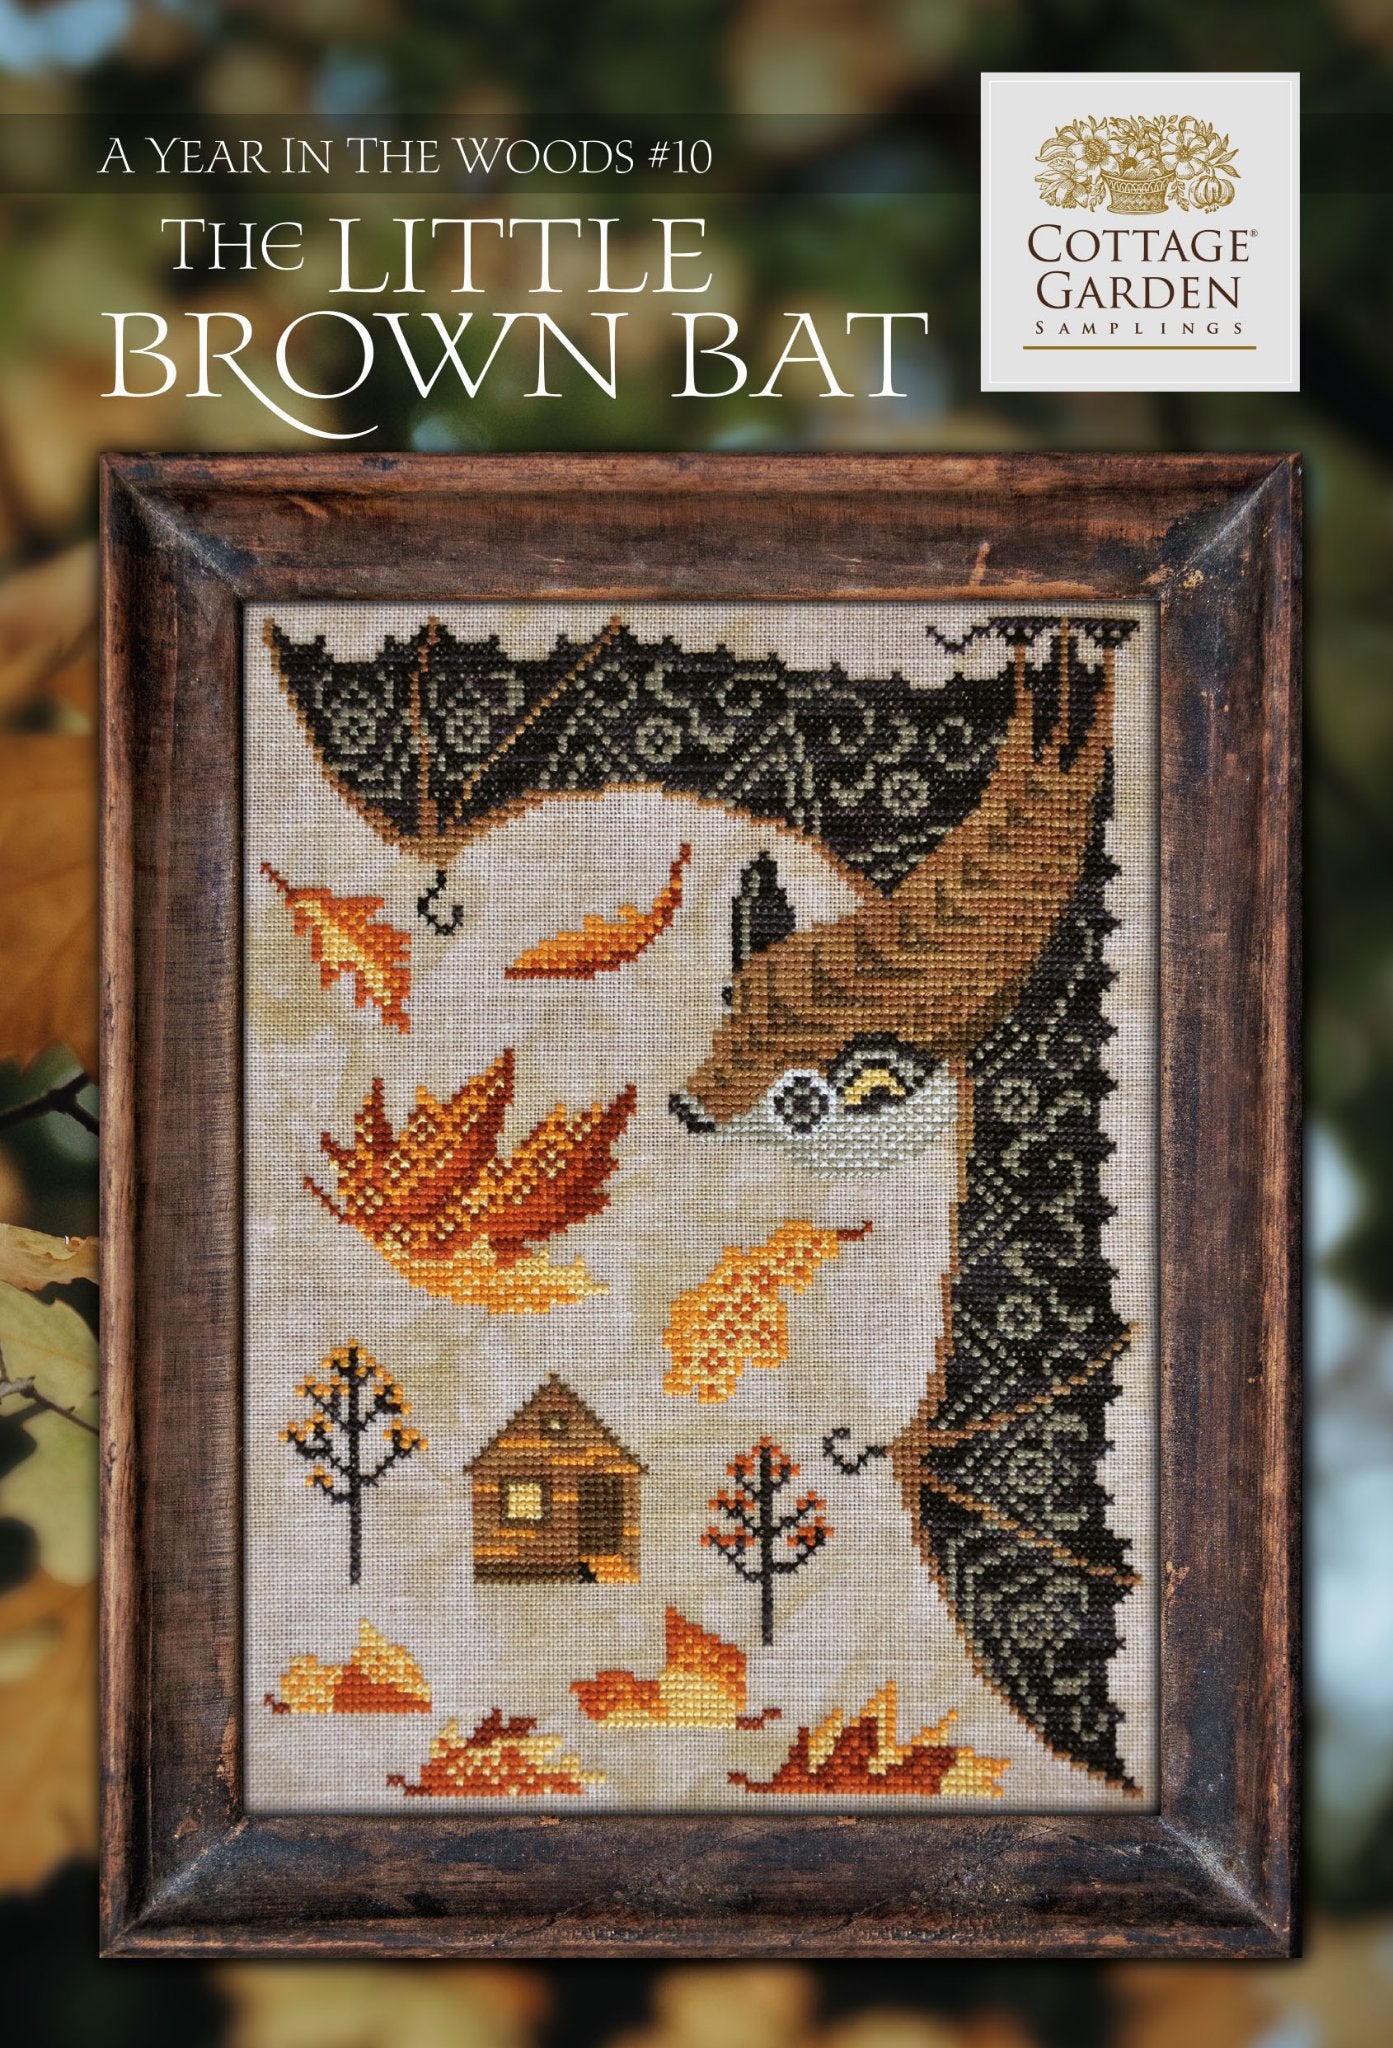 A Year in the Woods 11 - The Little Brown Bat - Cottage Garden Samplings - Cross Stitch Pattern